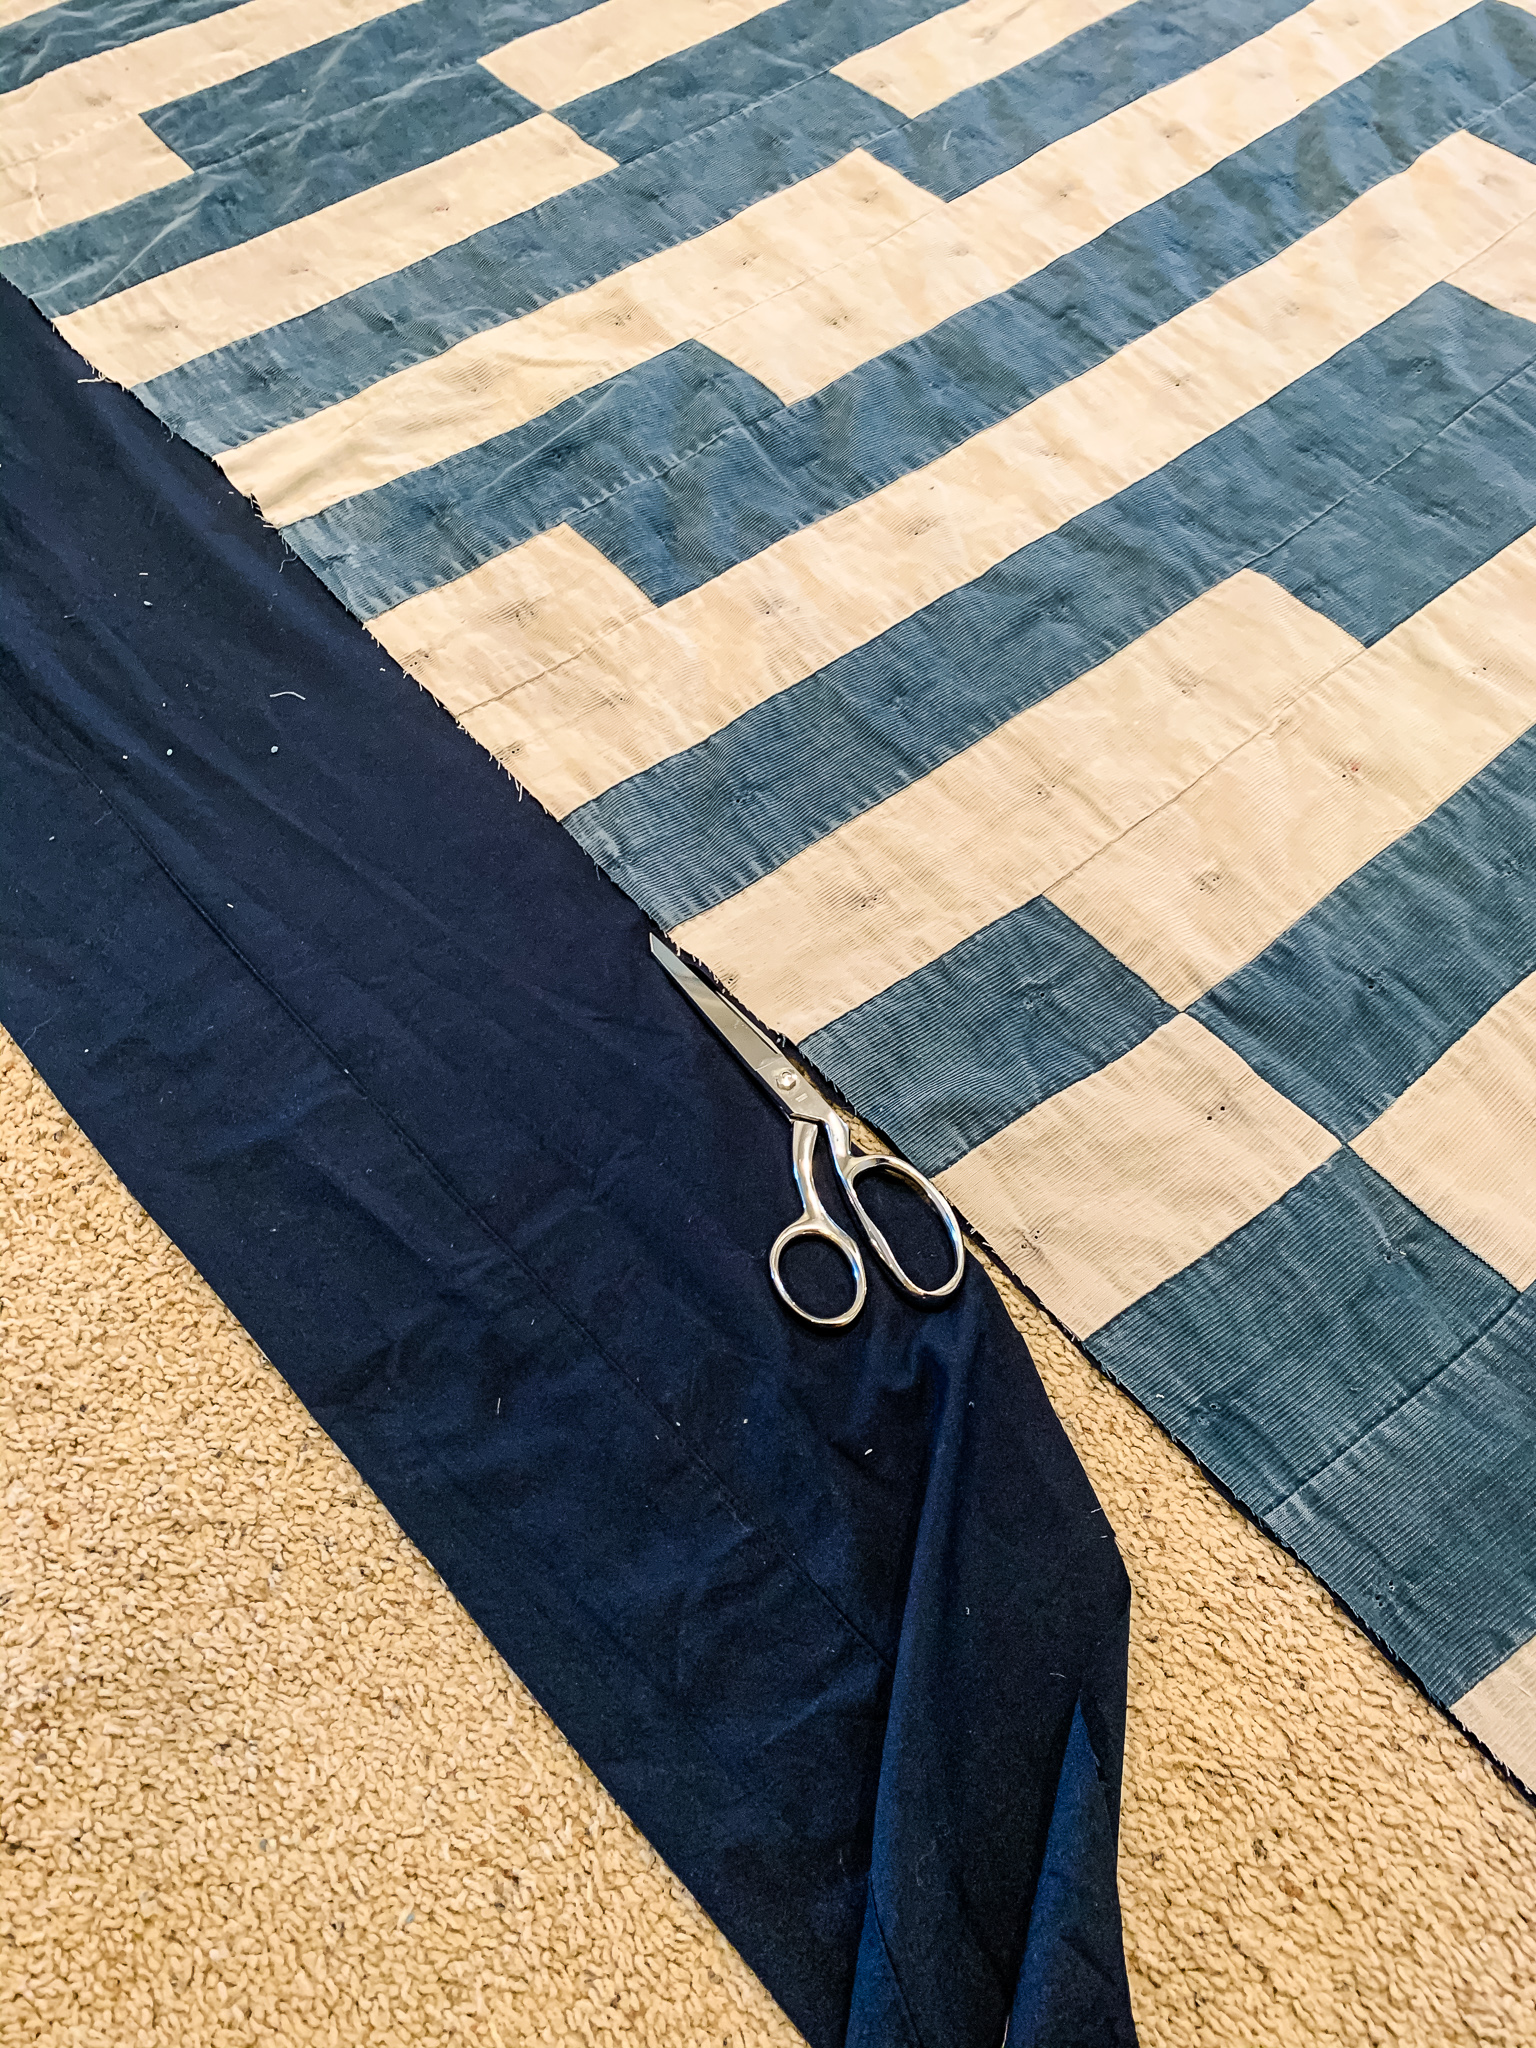 Putting a new back on Great Grandma's quilt | Gypsy Magpie